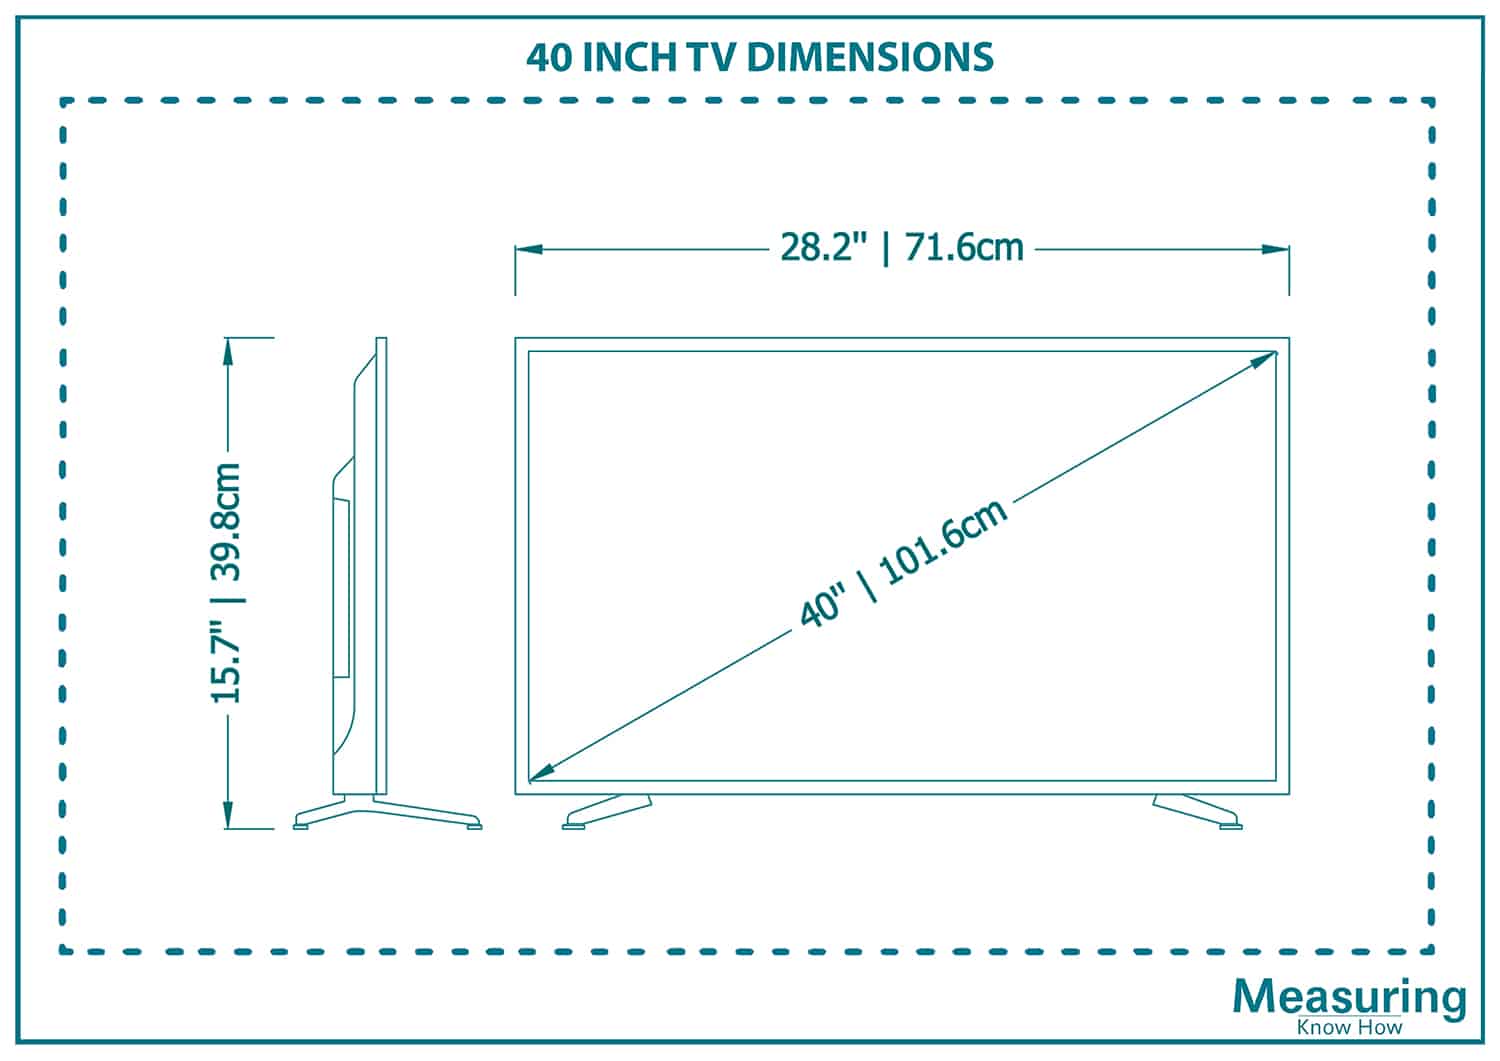 What Are the Average 40 inch TV Dimensions? - MeasuringKnowHow